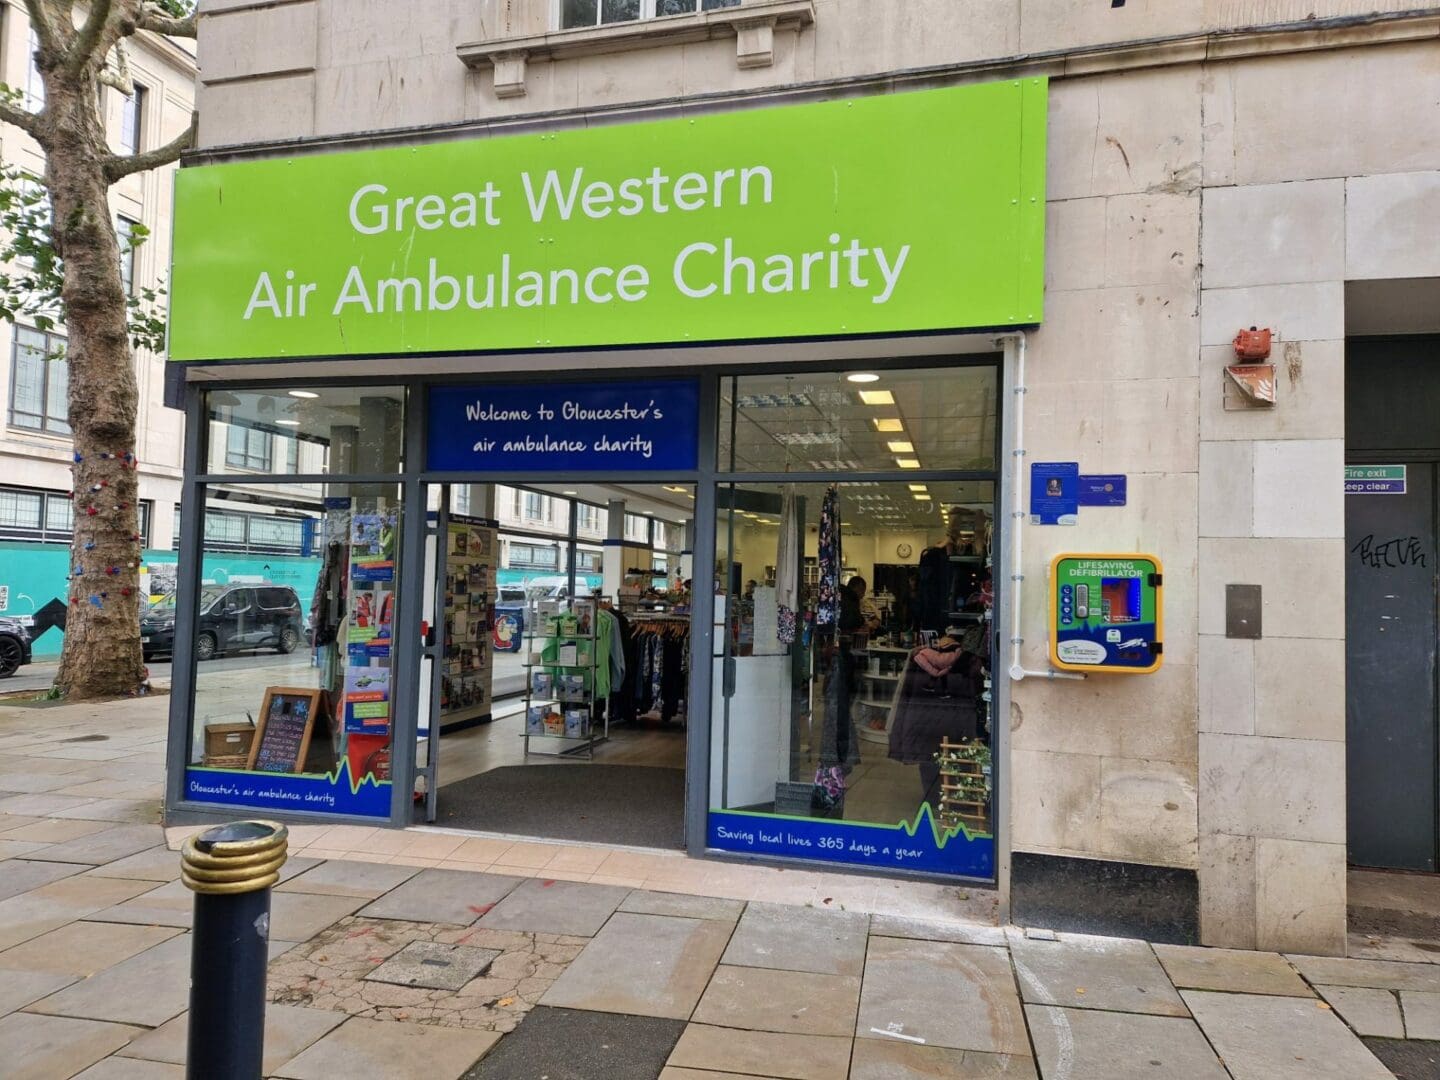 Location of the defib outside Great Western Air Ambulance Charity shop on Northgate Street.